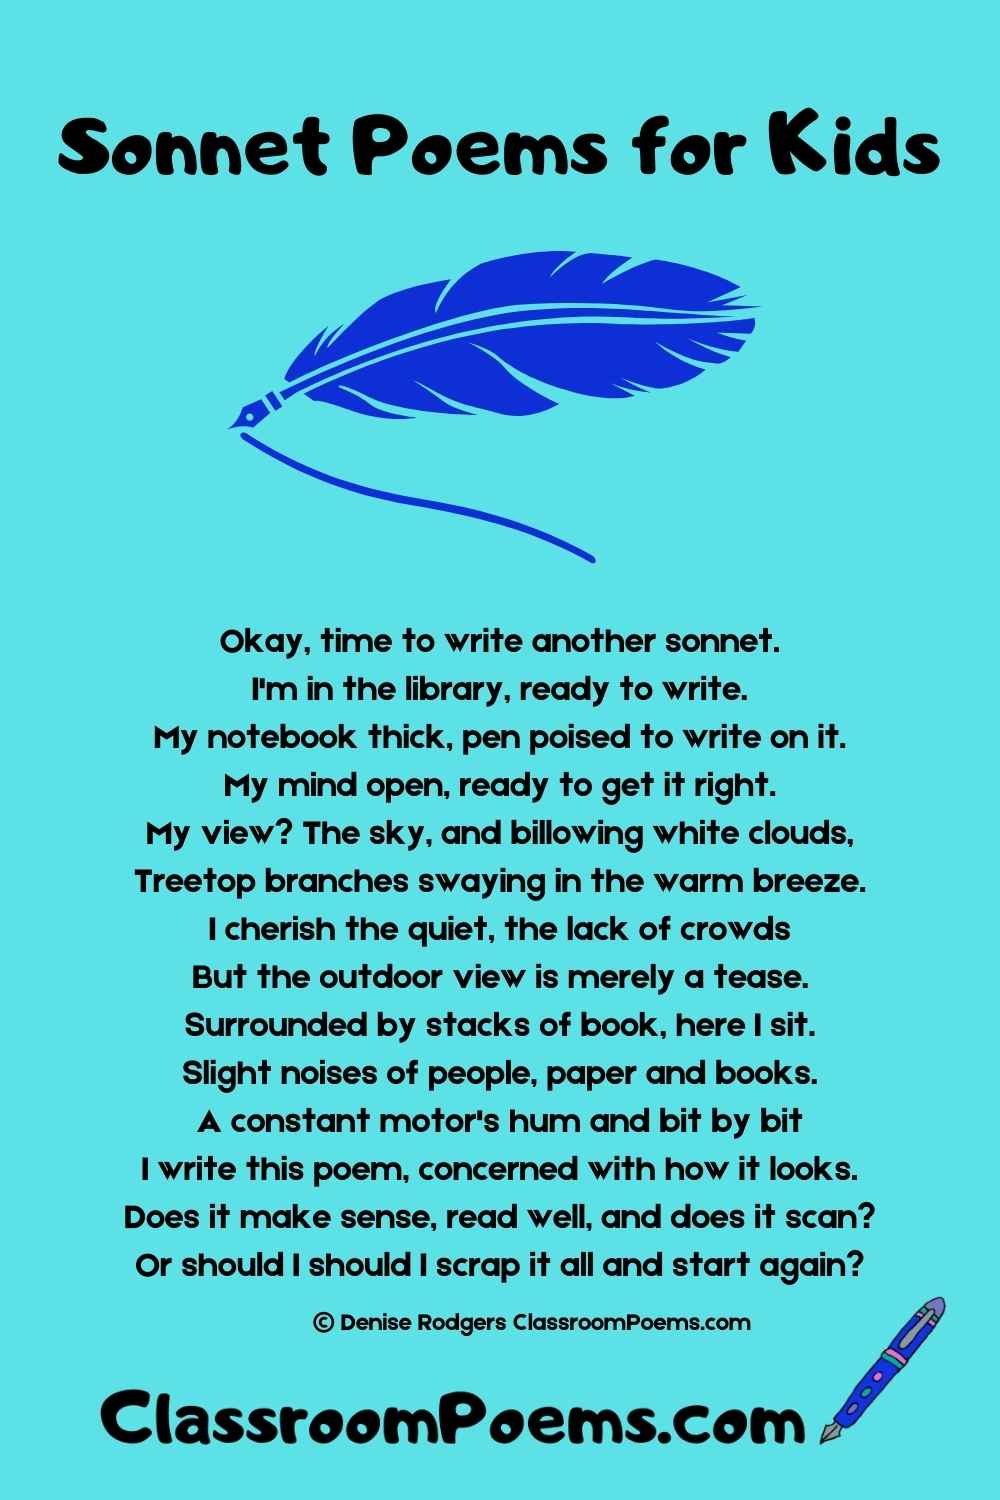 Sonnet Poems for kids by Denise Rodgers on ClassroomPoems.com.